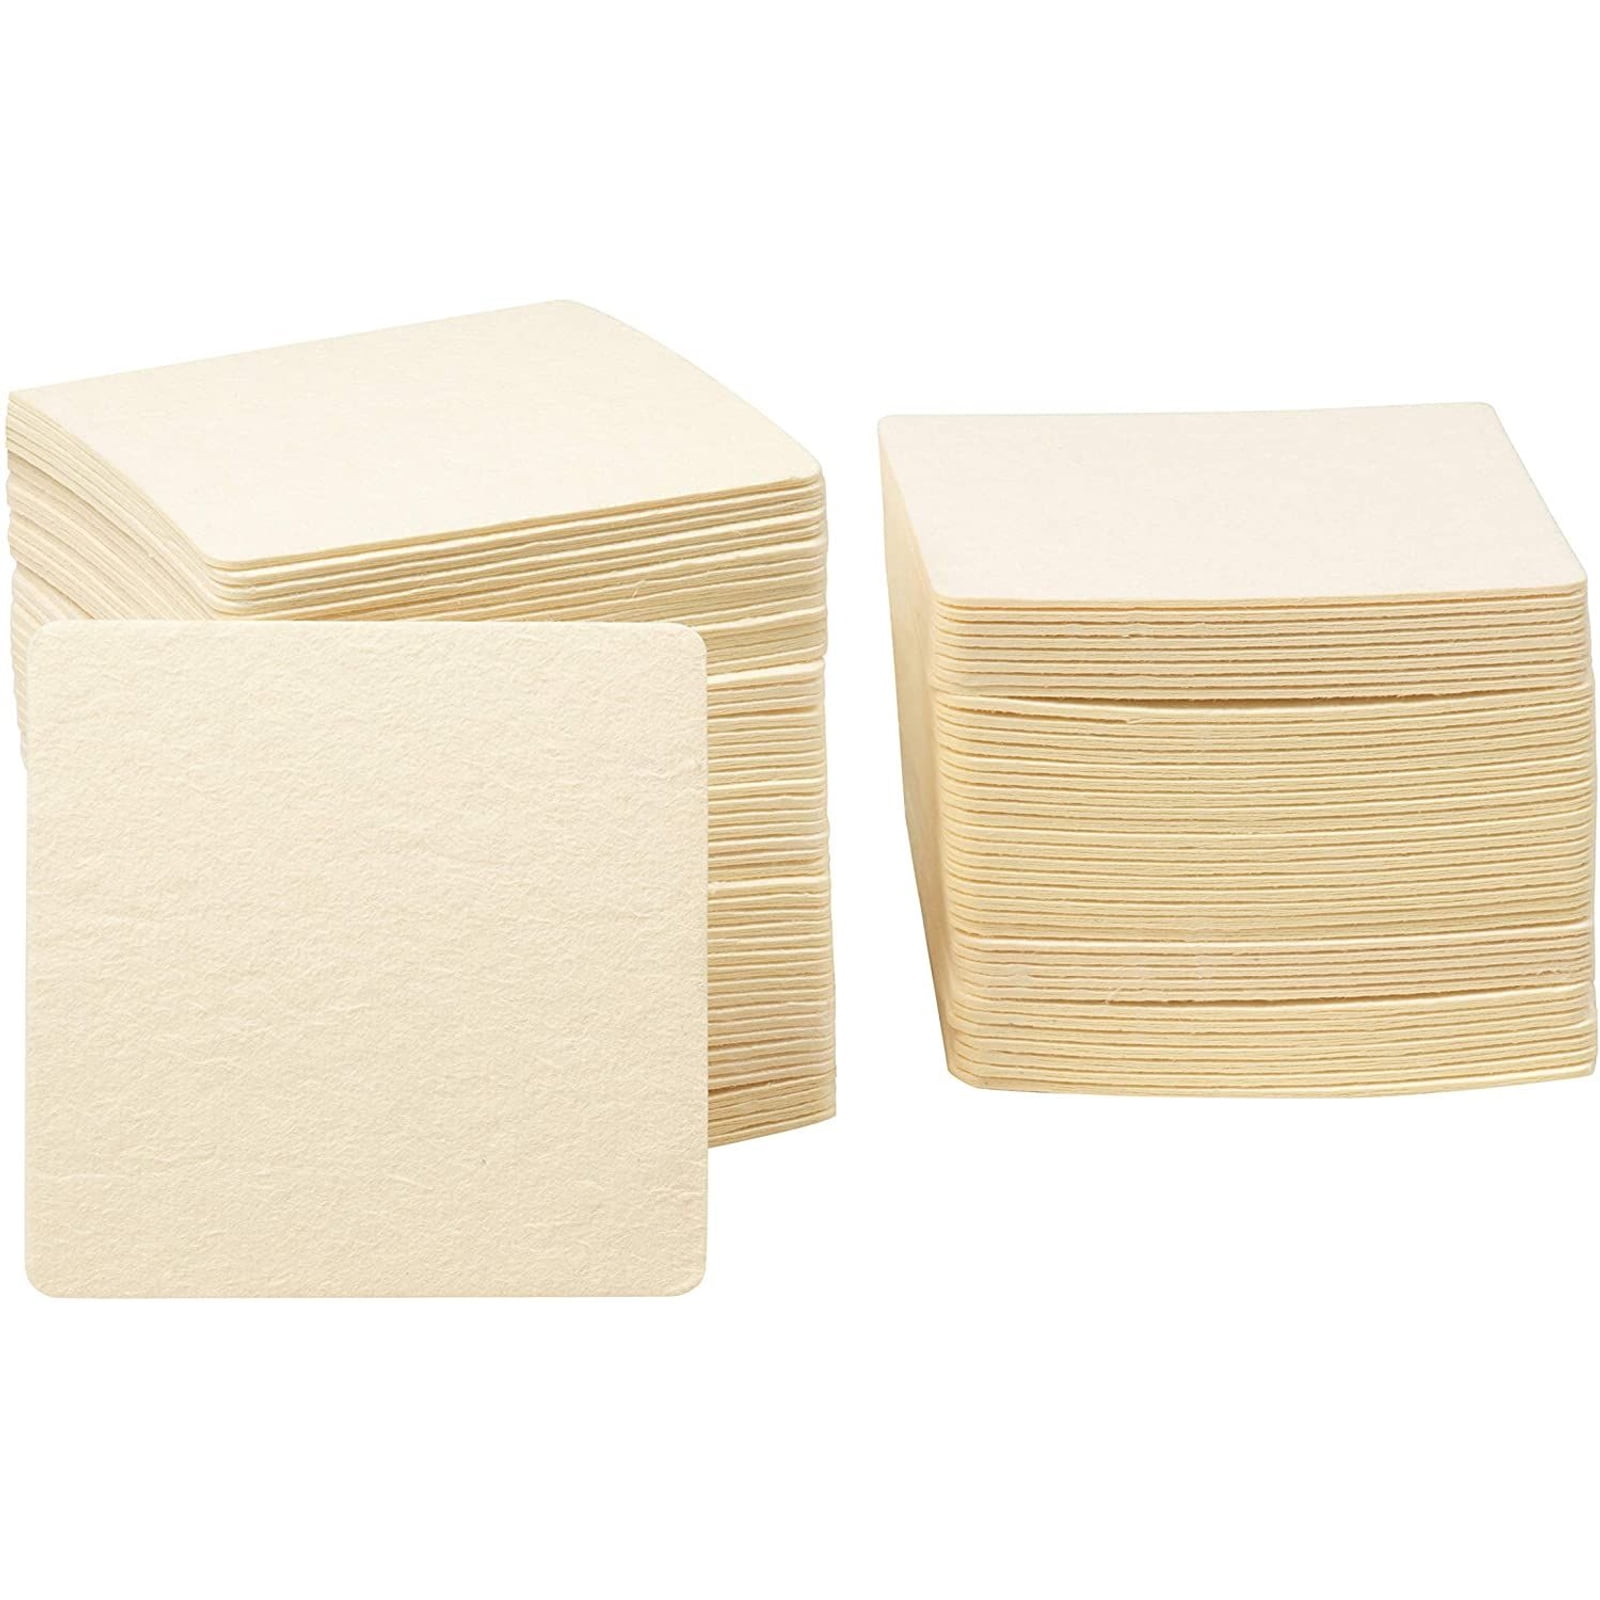 30 disposable coasters per pack 4 packages of Paper Coasters 2 different N422 